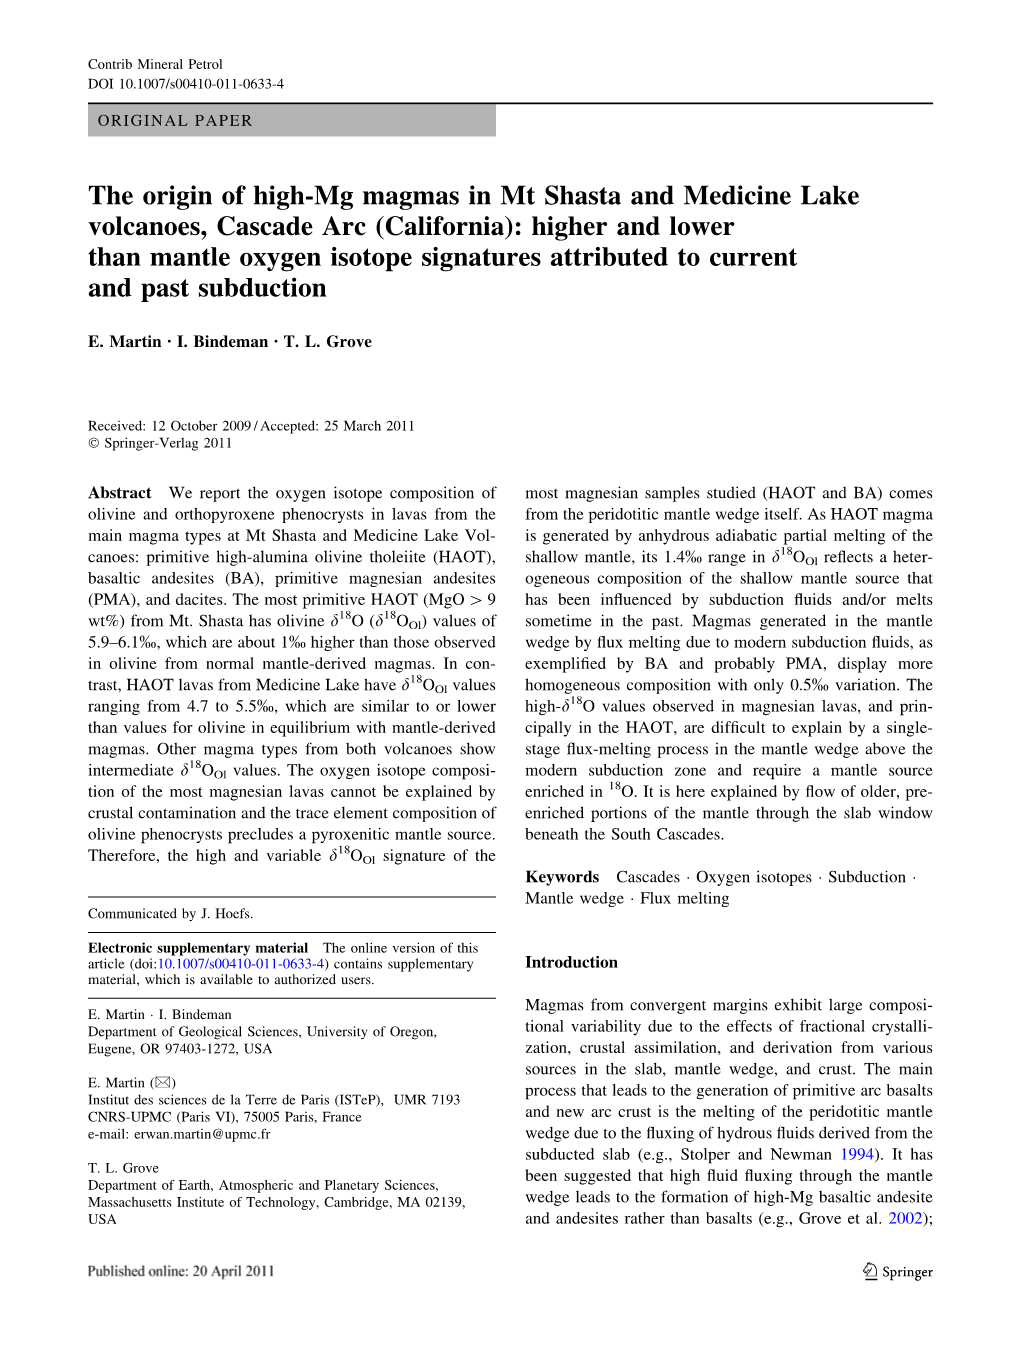 The Origin of High-Mg Magmas in Mt Shasta And